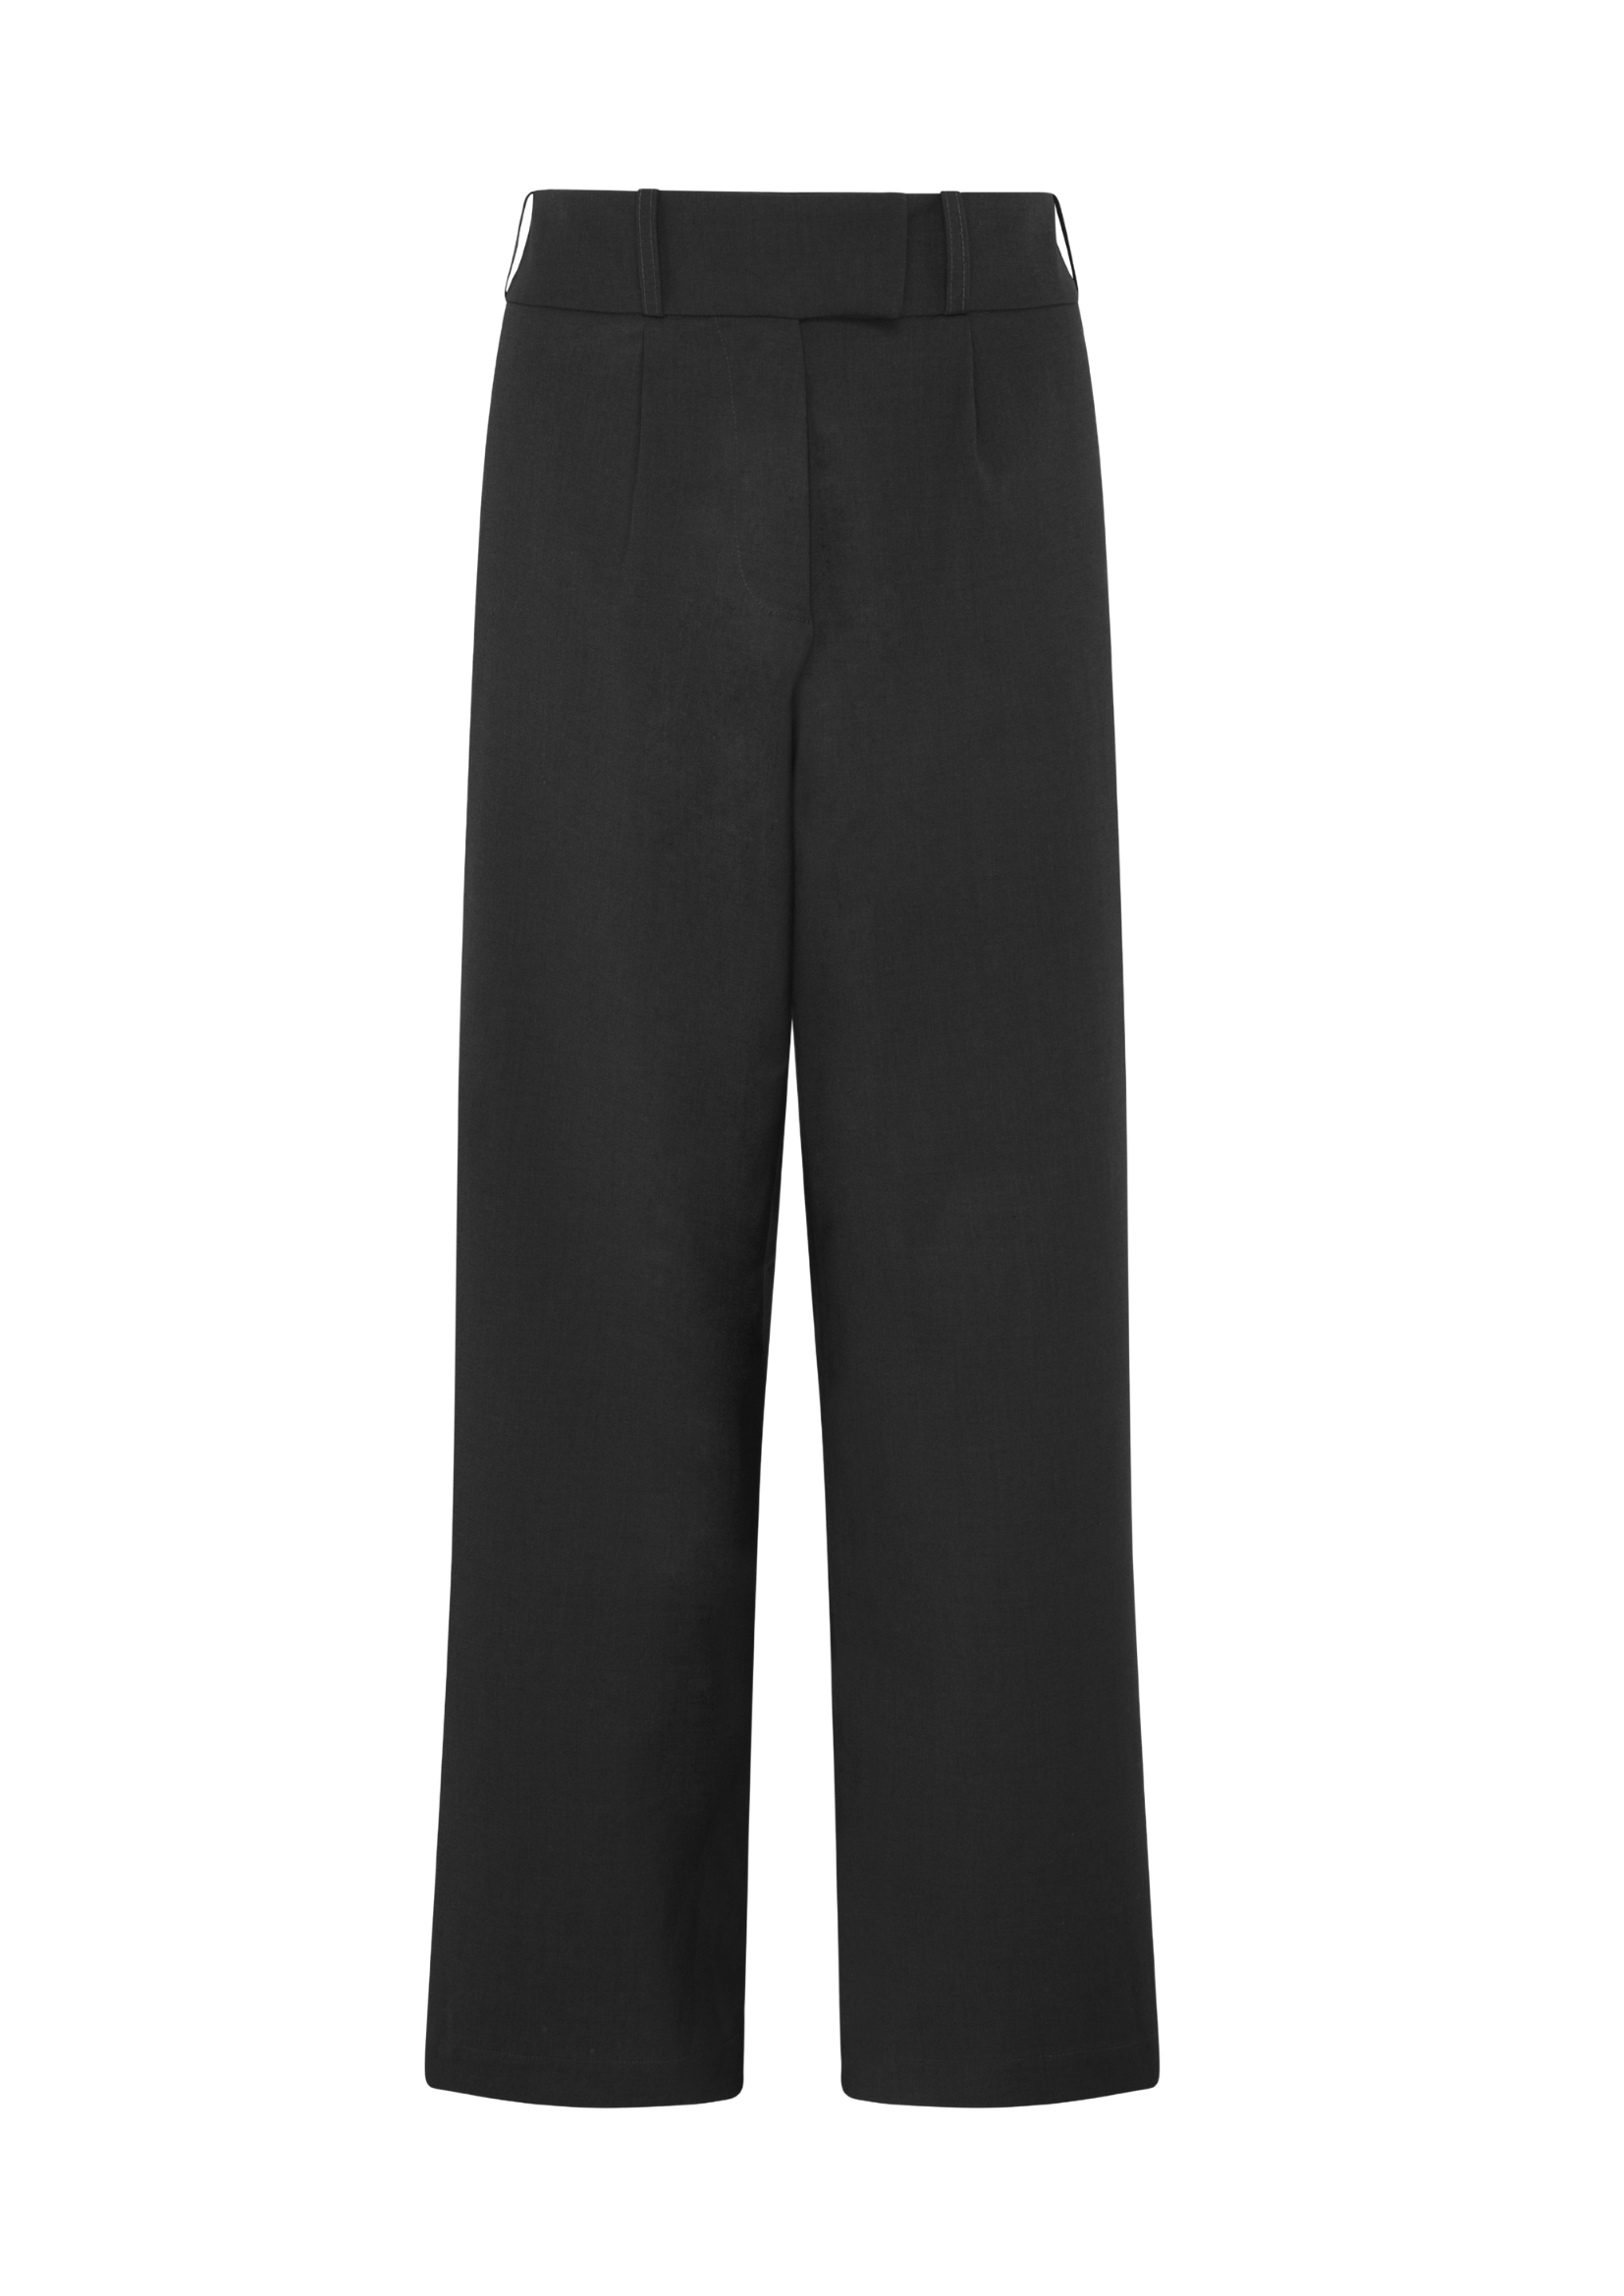 WIDE LEG SUITING TROUSER PANTS in Black